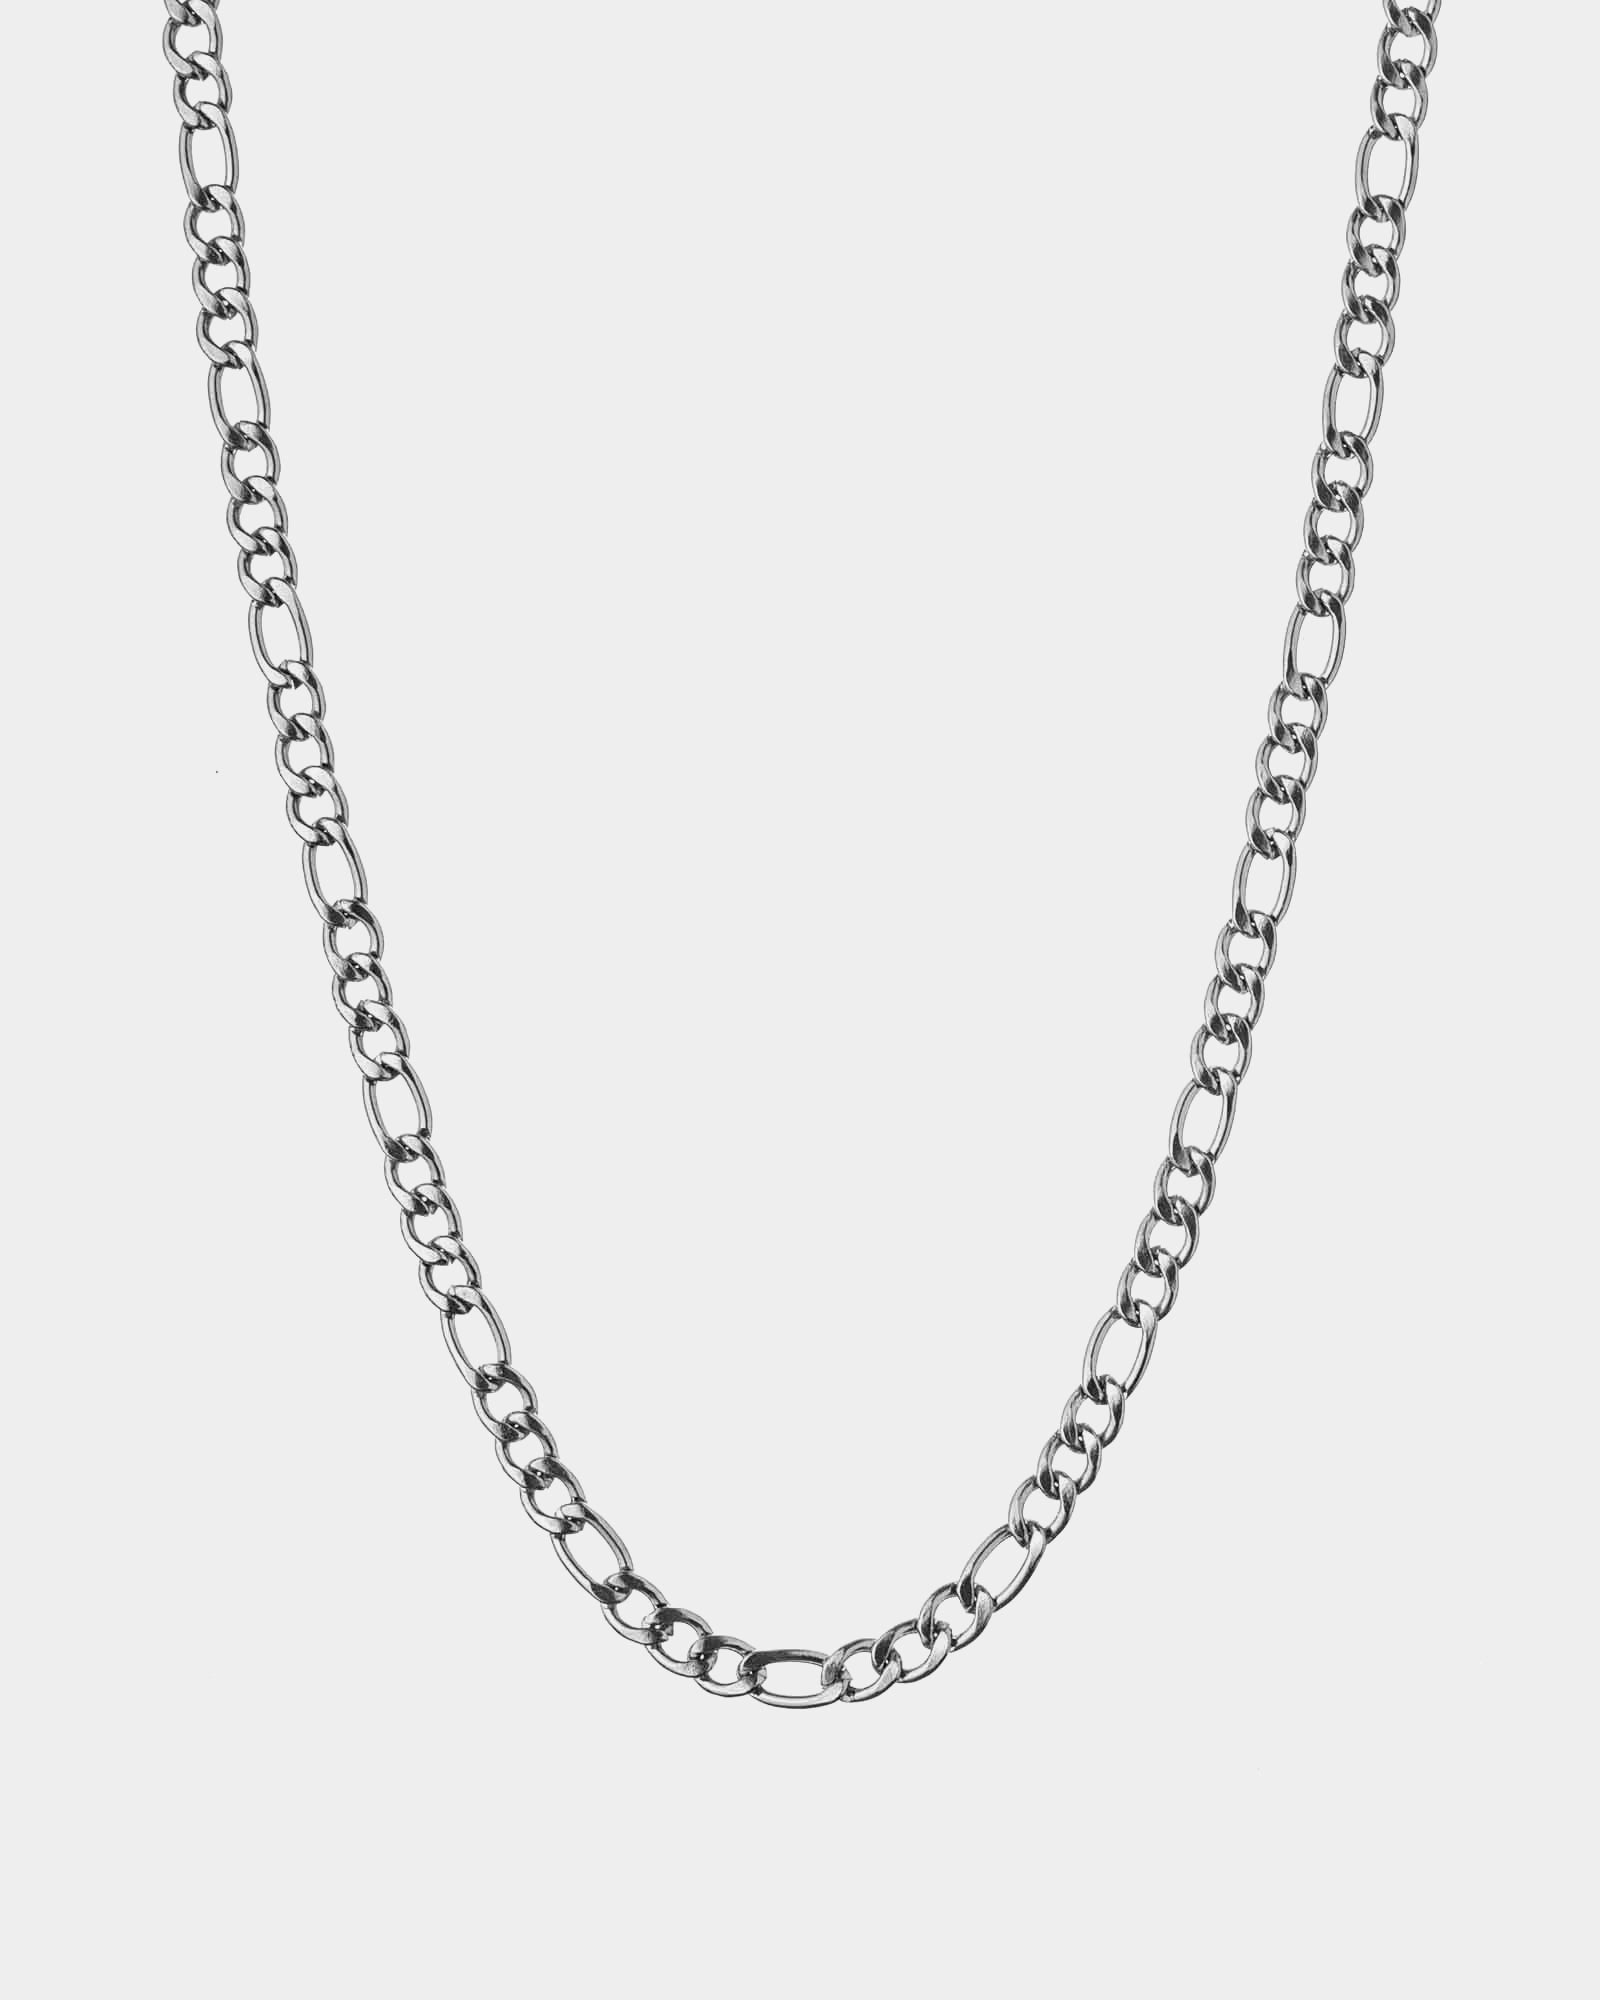 Namibia - Stainless Steel Necklace 'Namibia' - Silver Chain - Online Unissex Jewelry - Dicci